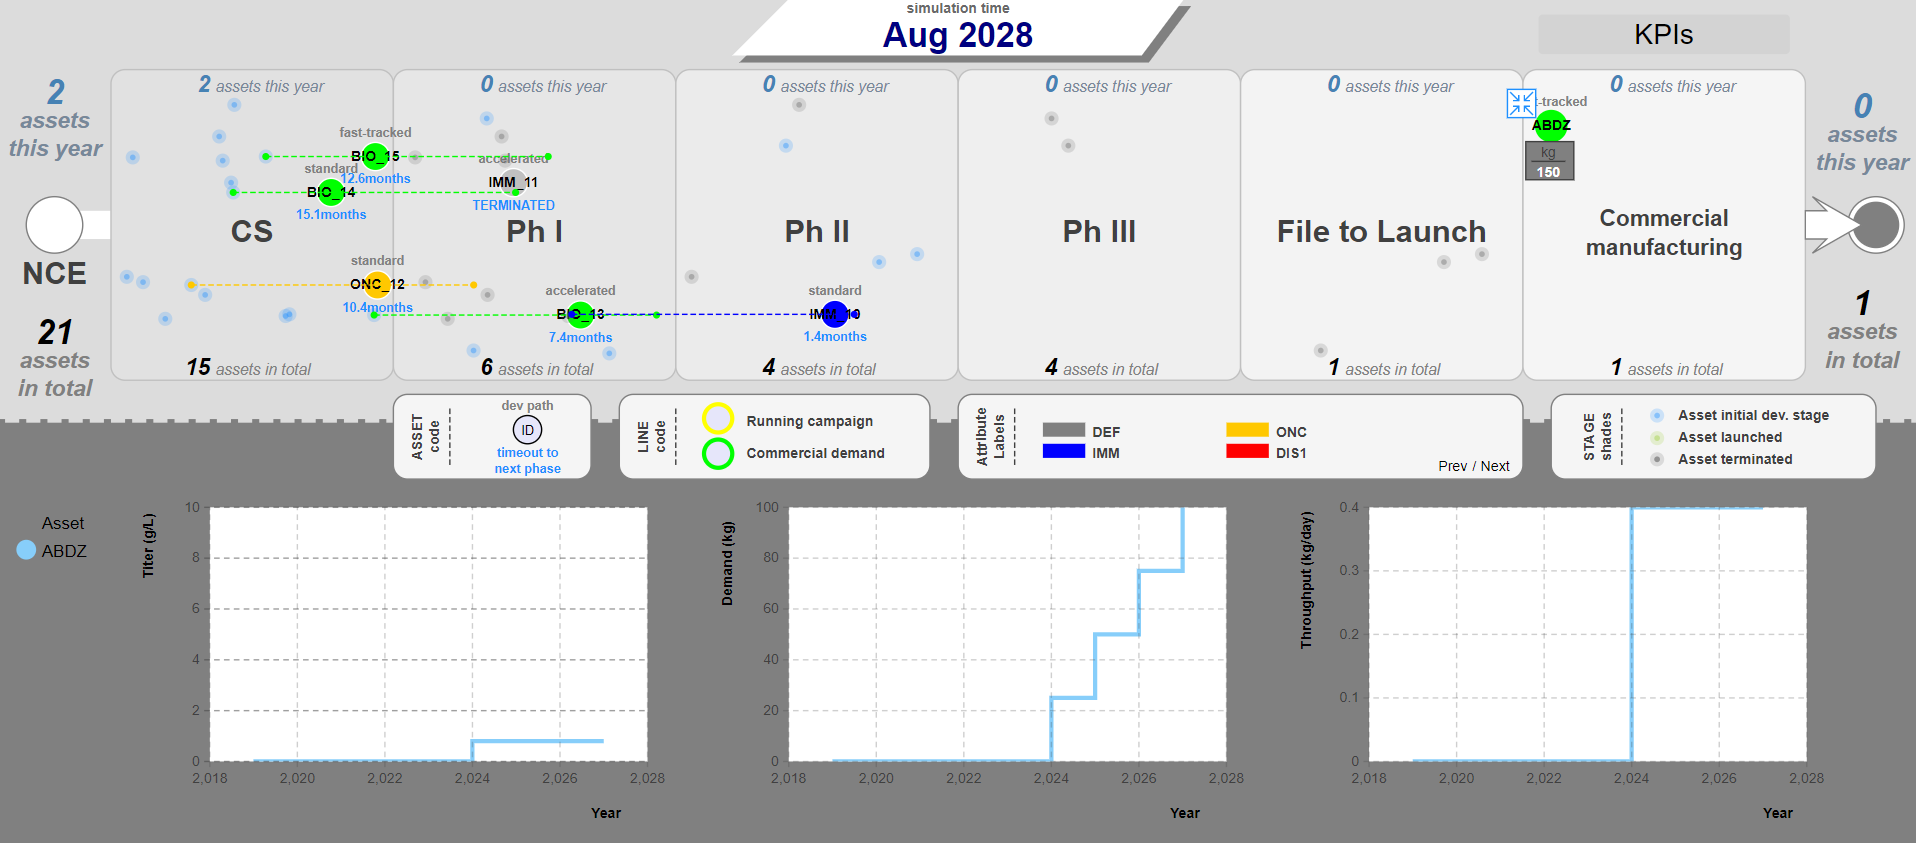 Simulation model dashboard for optimising pharmaceutical research and development